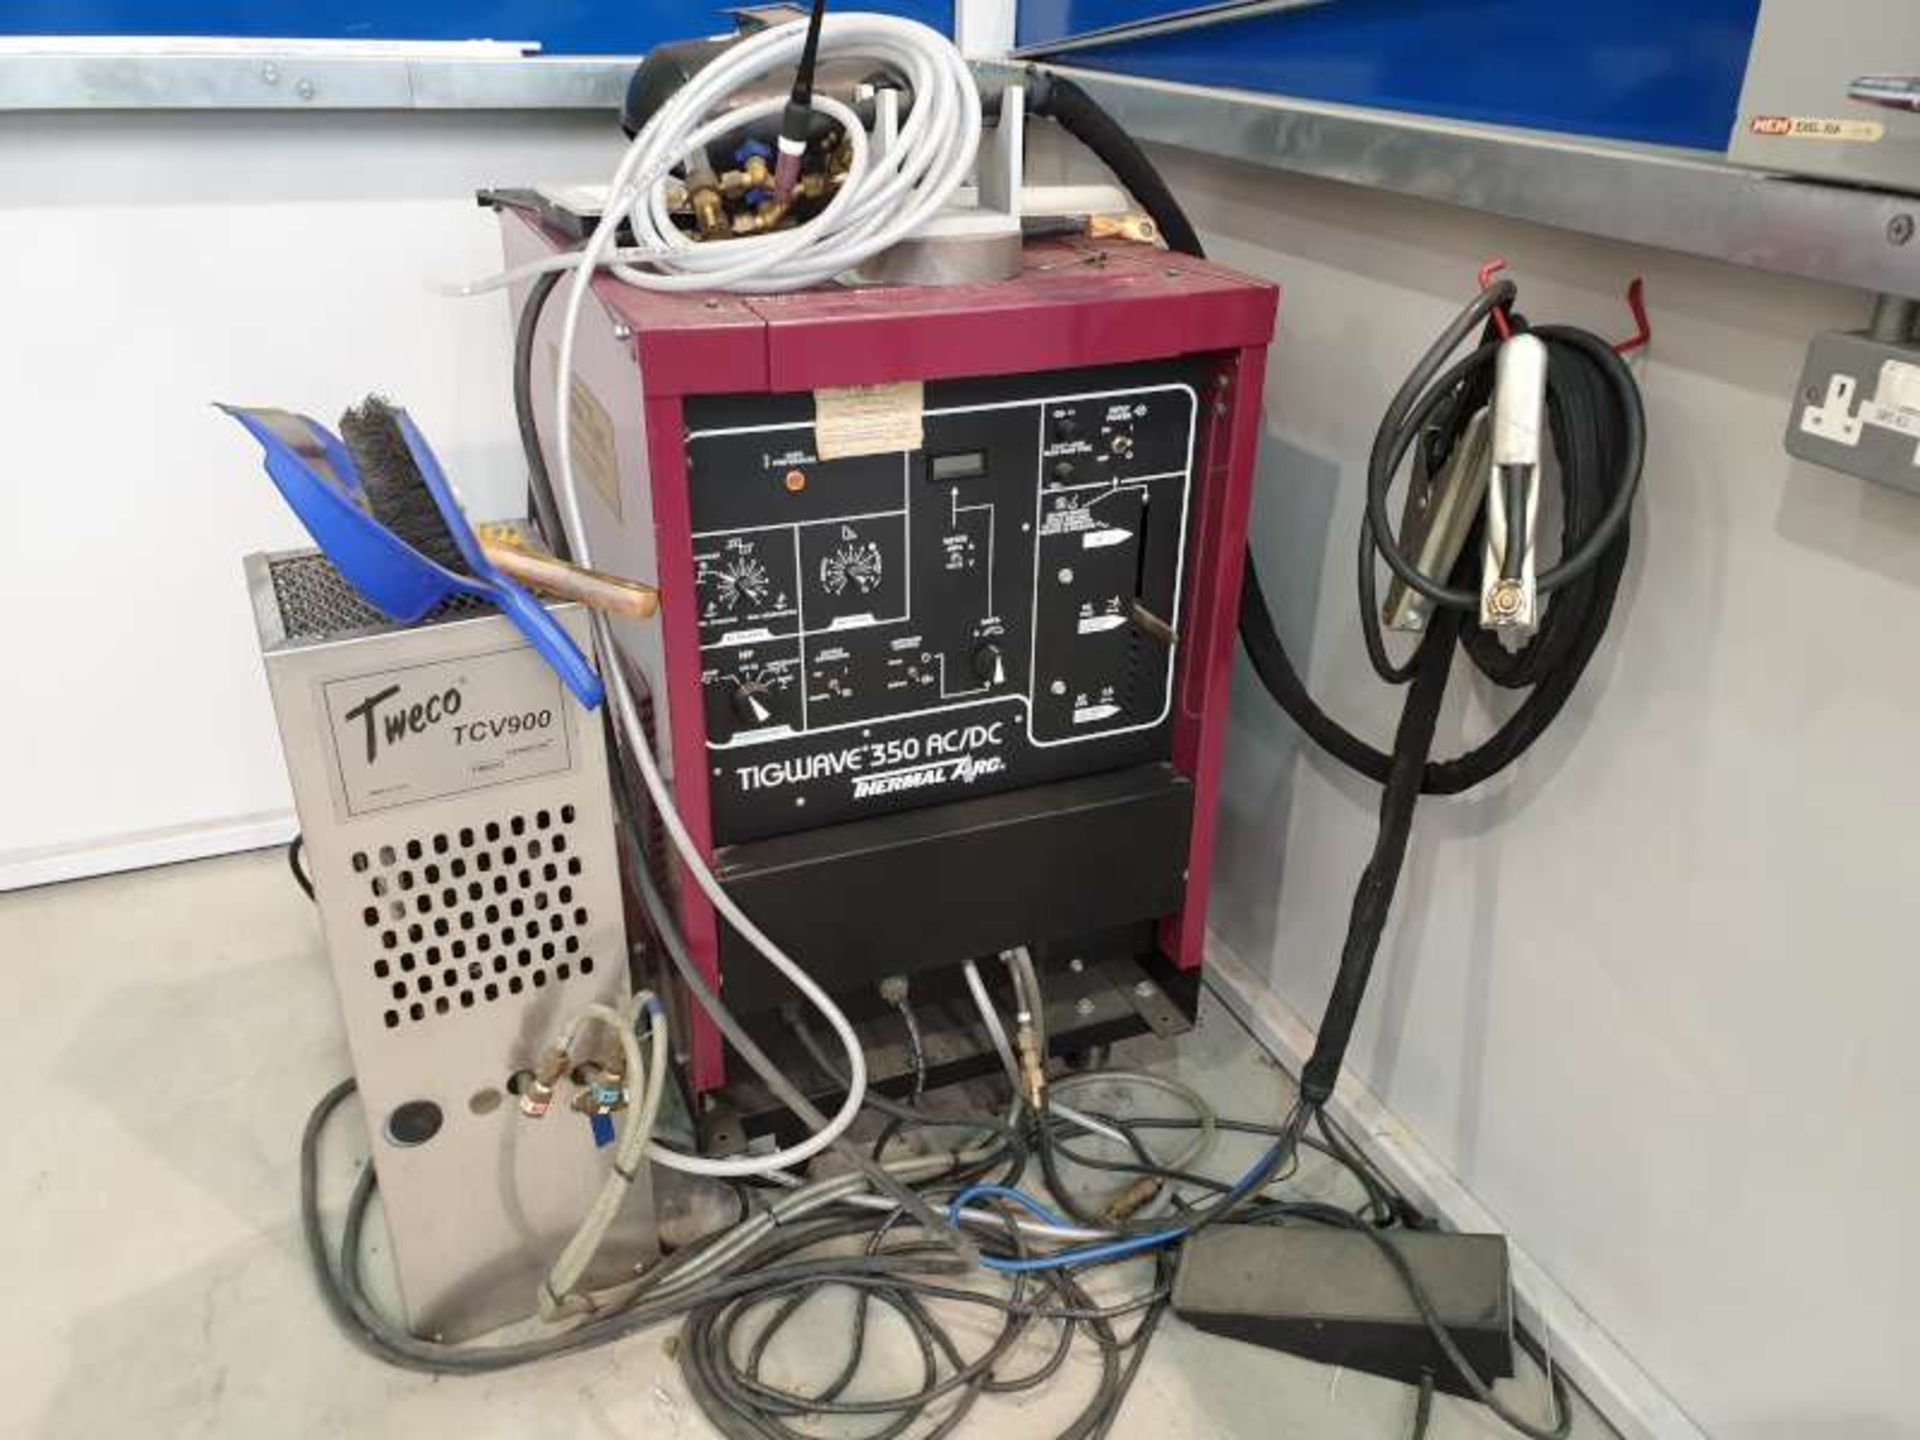 THERMAL ARC TIGWAVE 350 AC/DC WELDING SET WITH TWECO TCV900 CHILLER UNIT